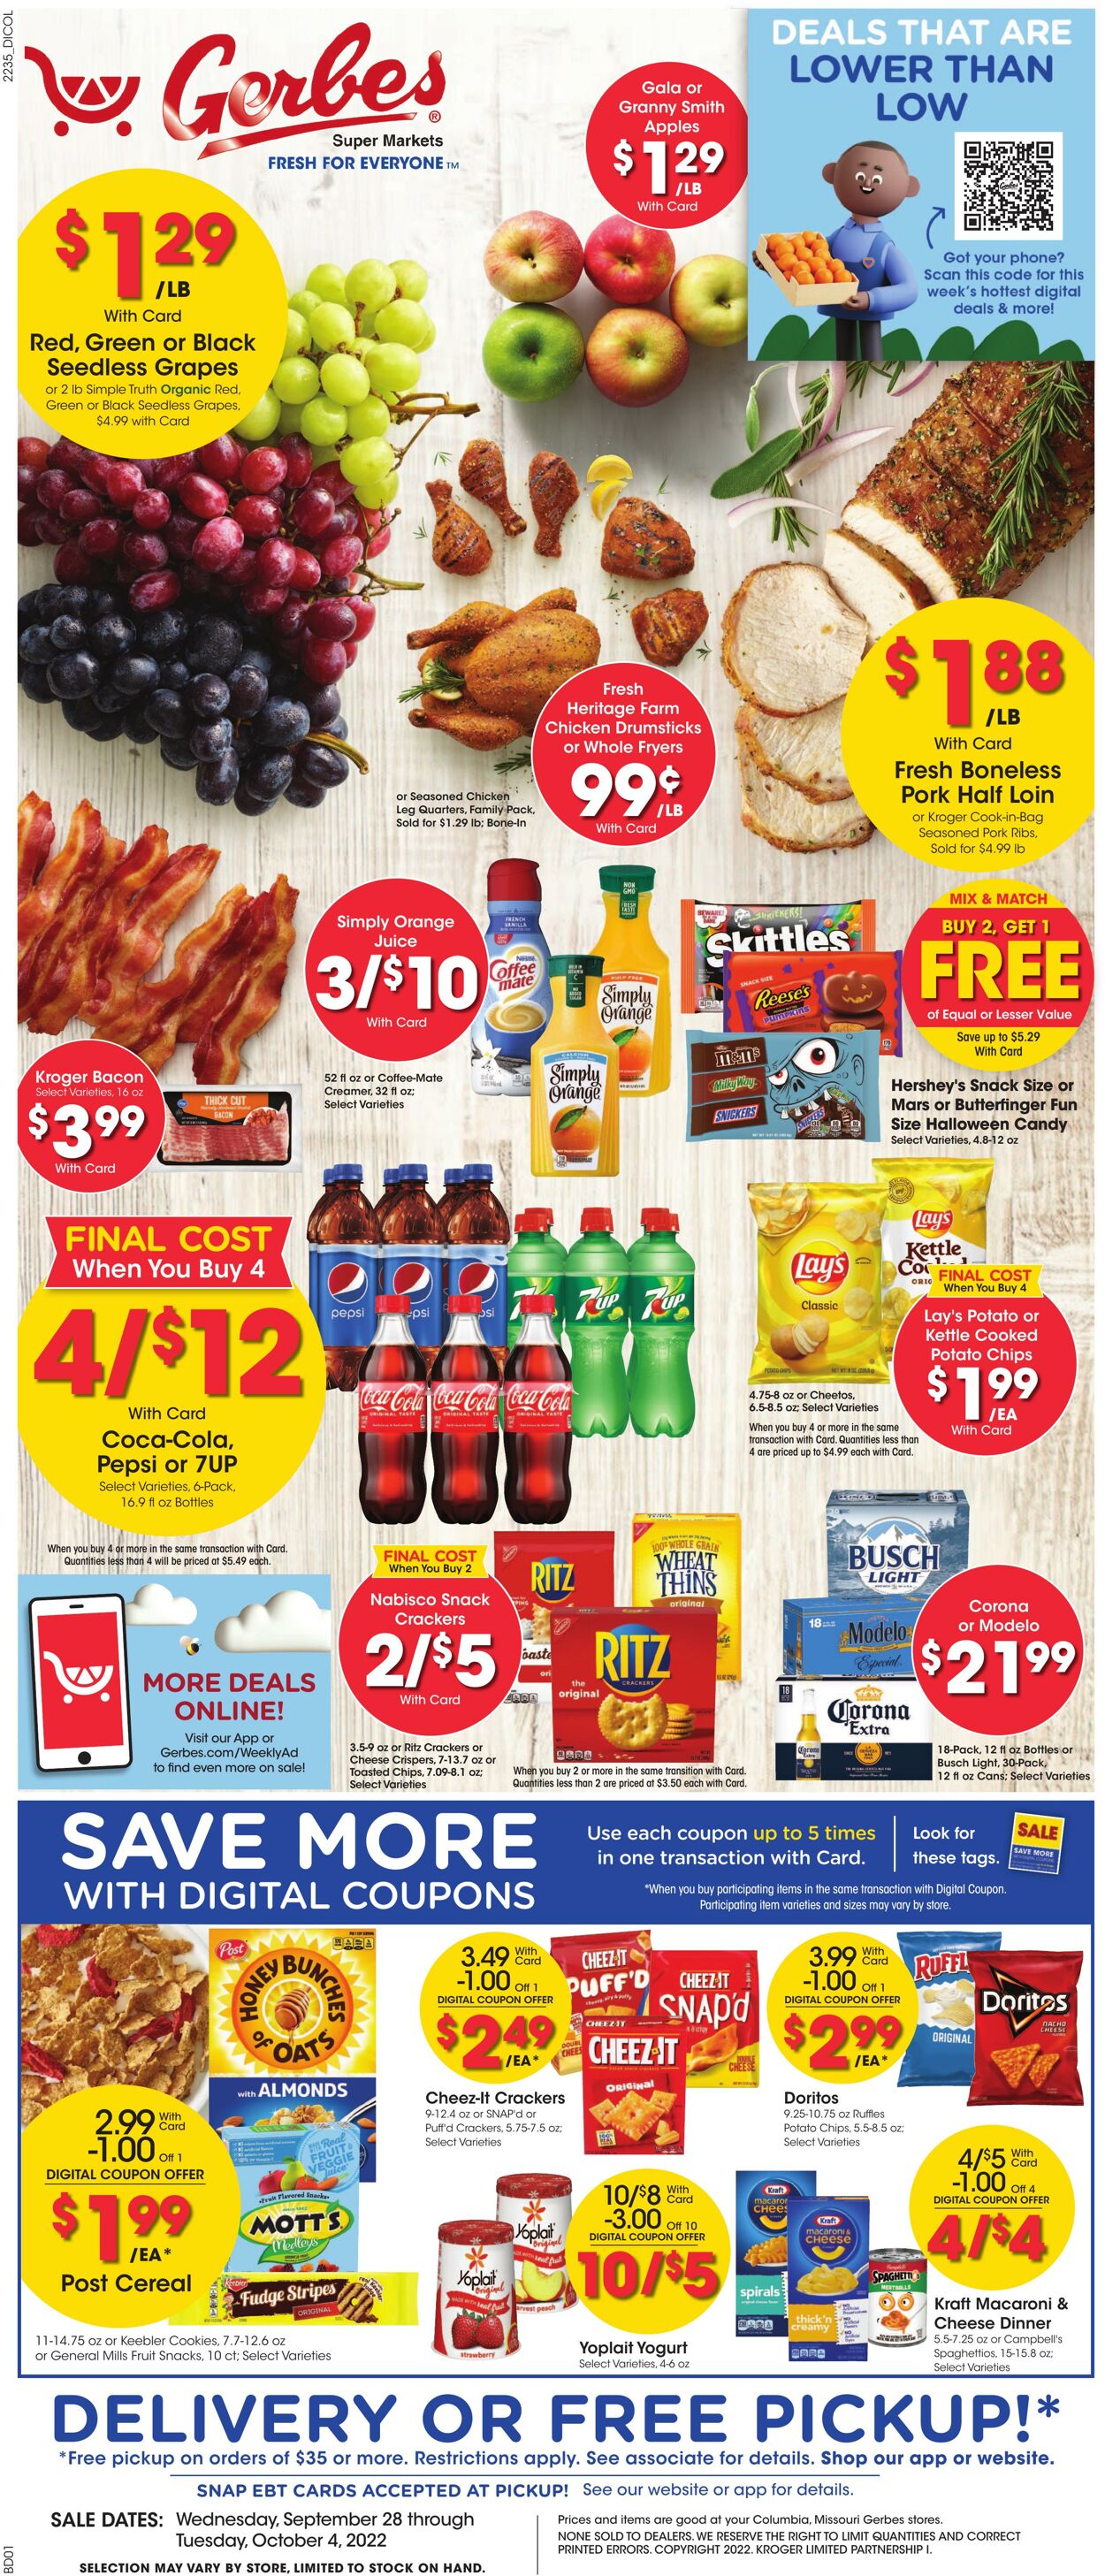 Gerbes Supermarkets Promotional weekly ads